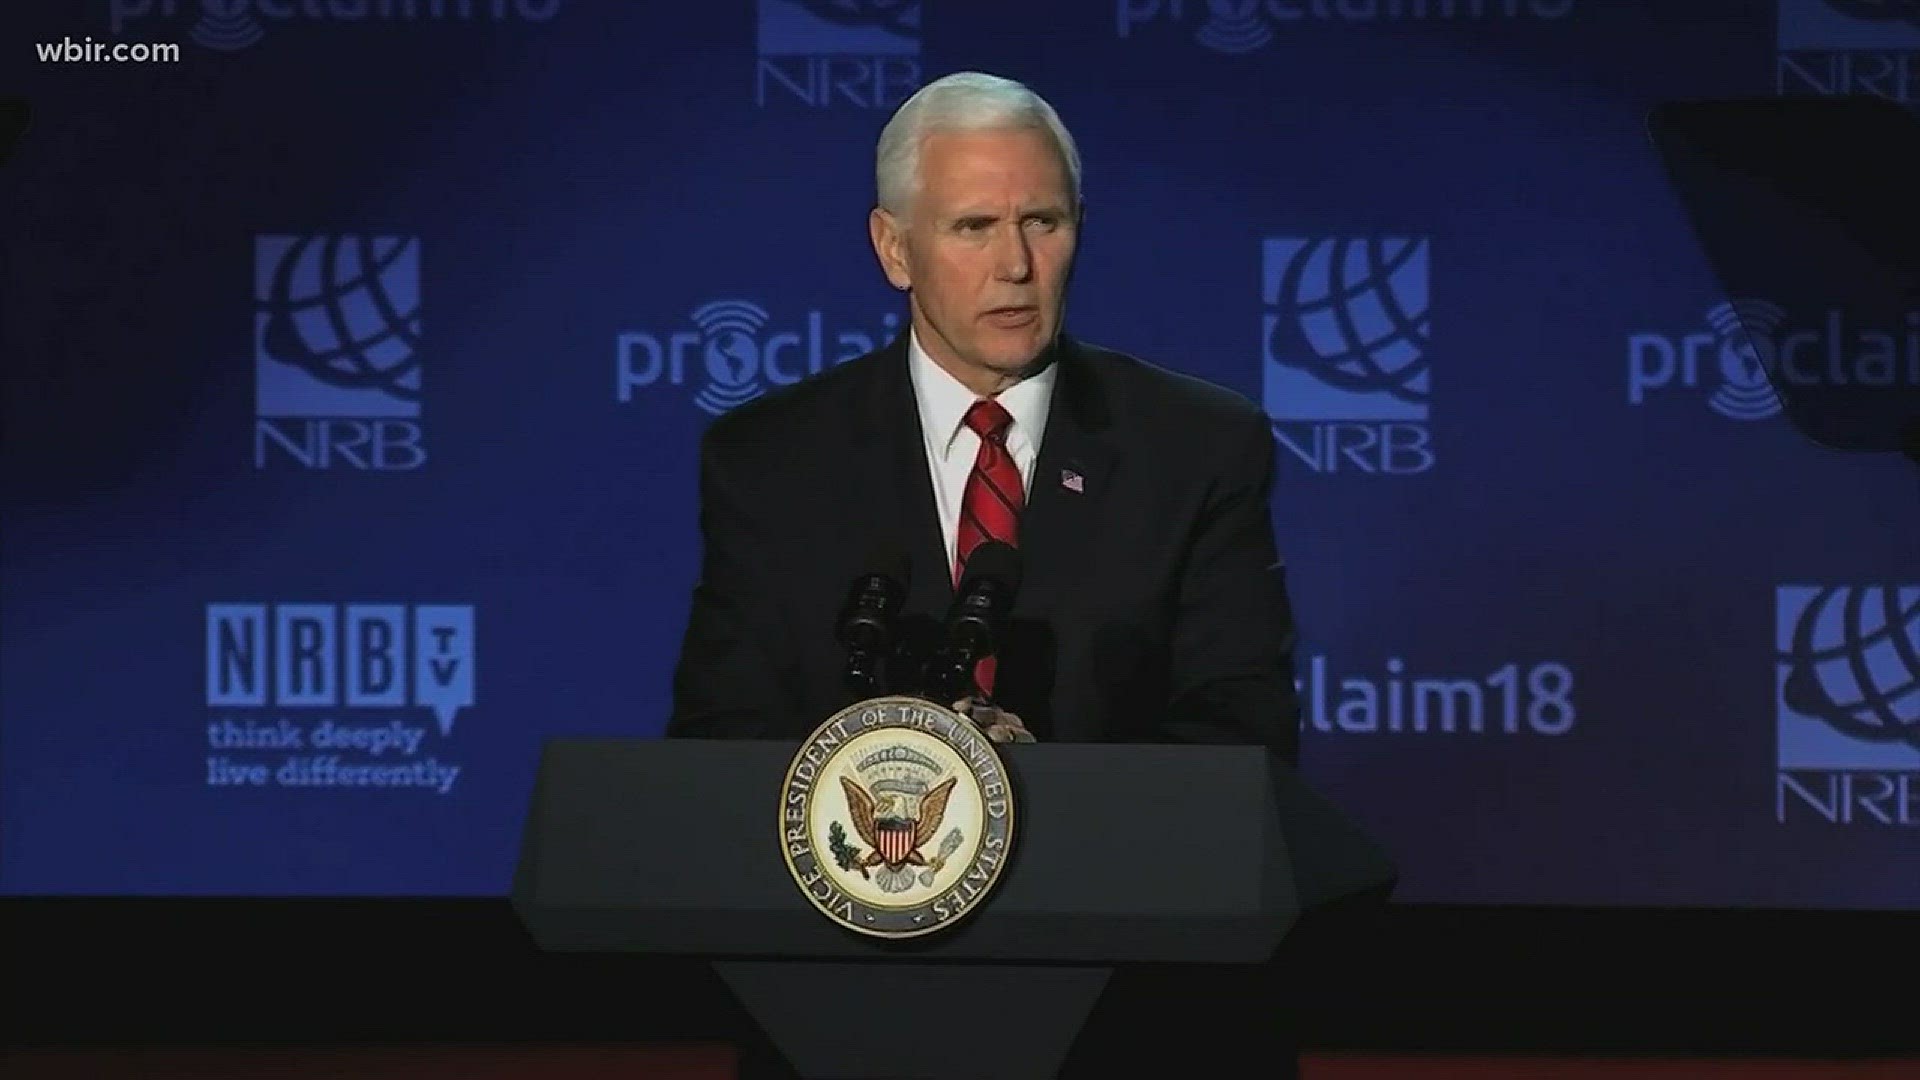 Feb. 27, 2018: Vice President Mike Pence visited Nashville to speak to the National Religious Broadcasters annual conference.